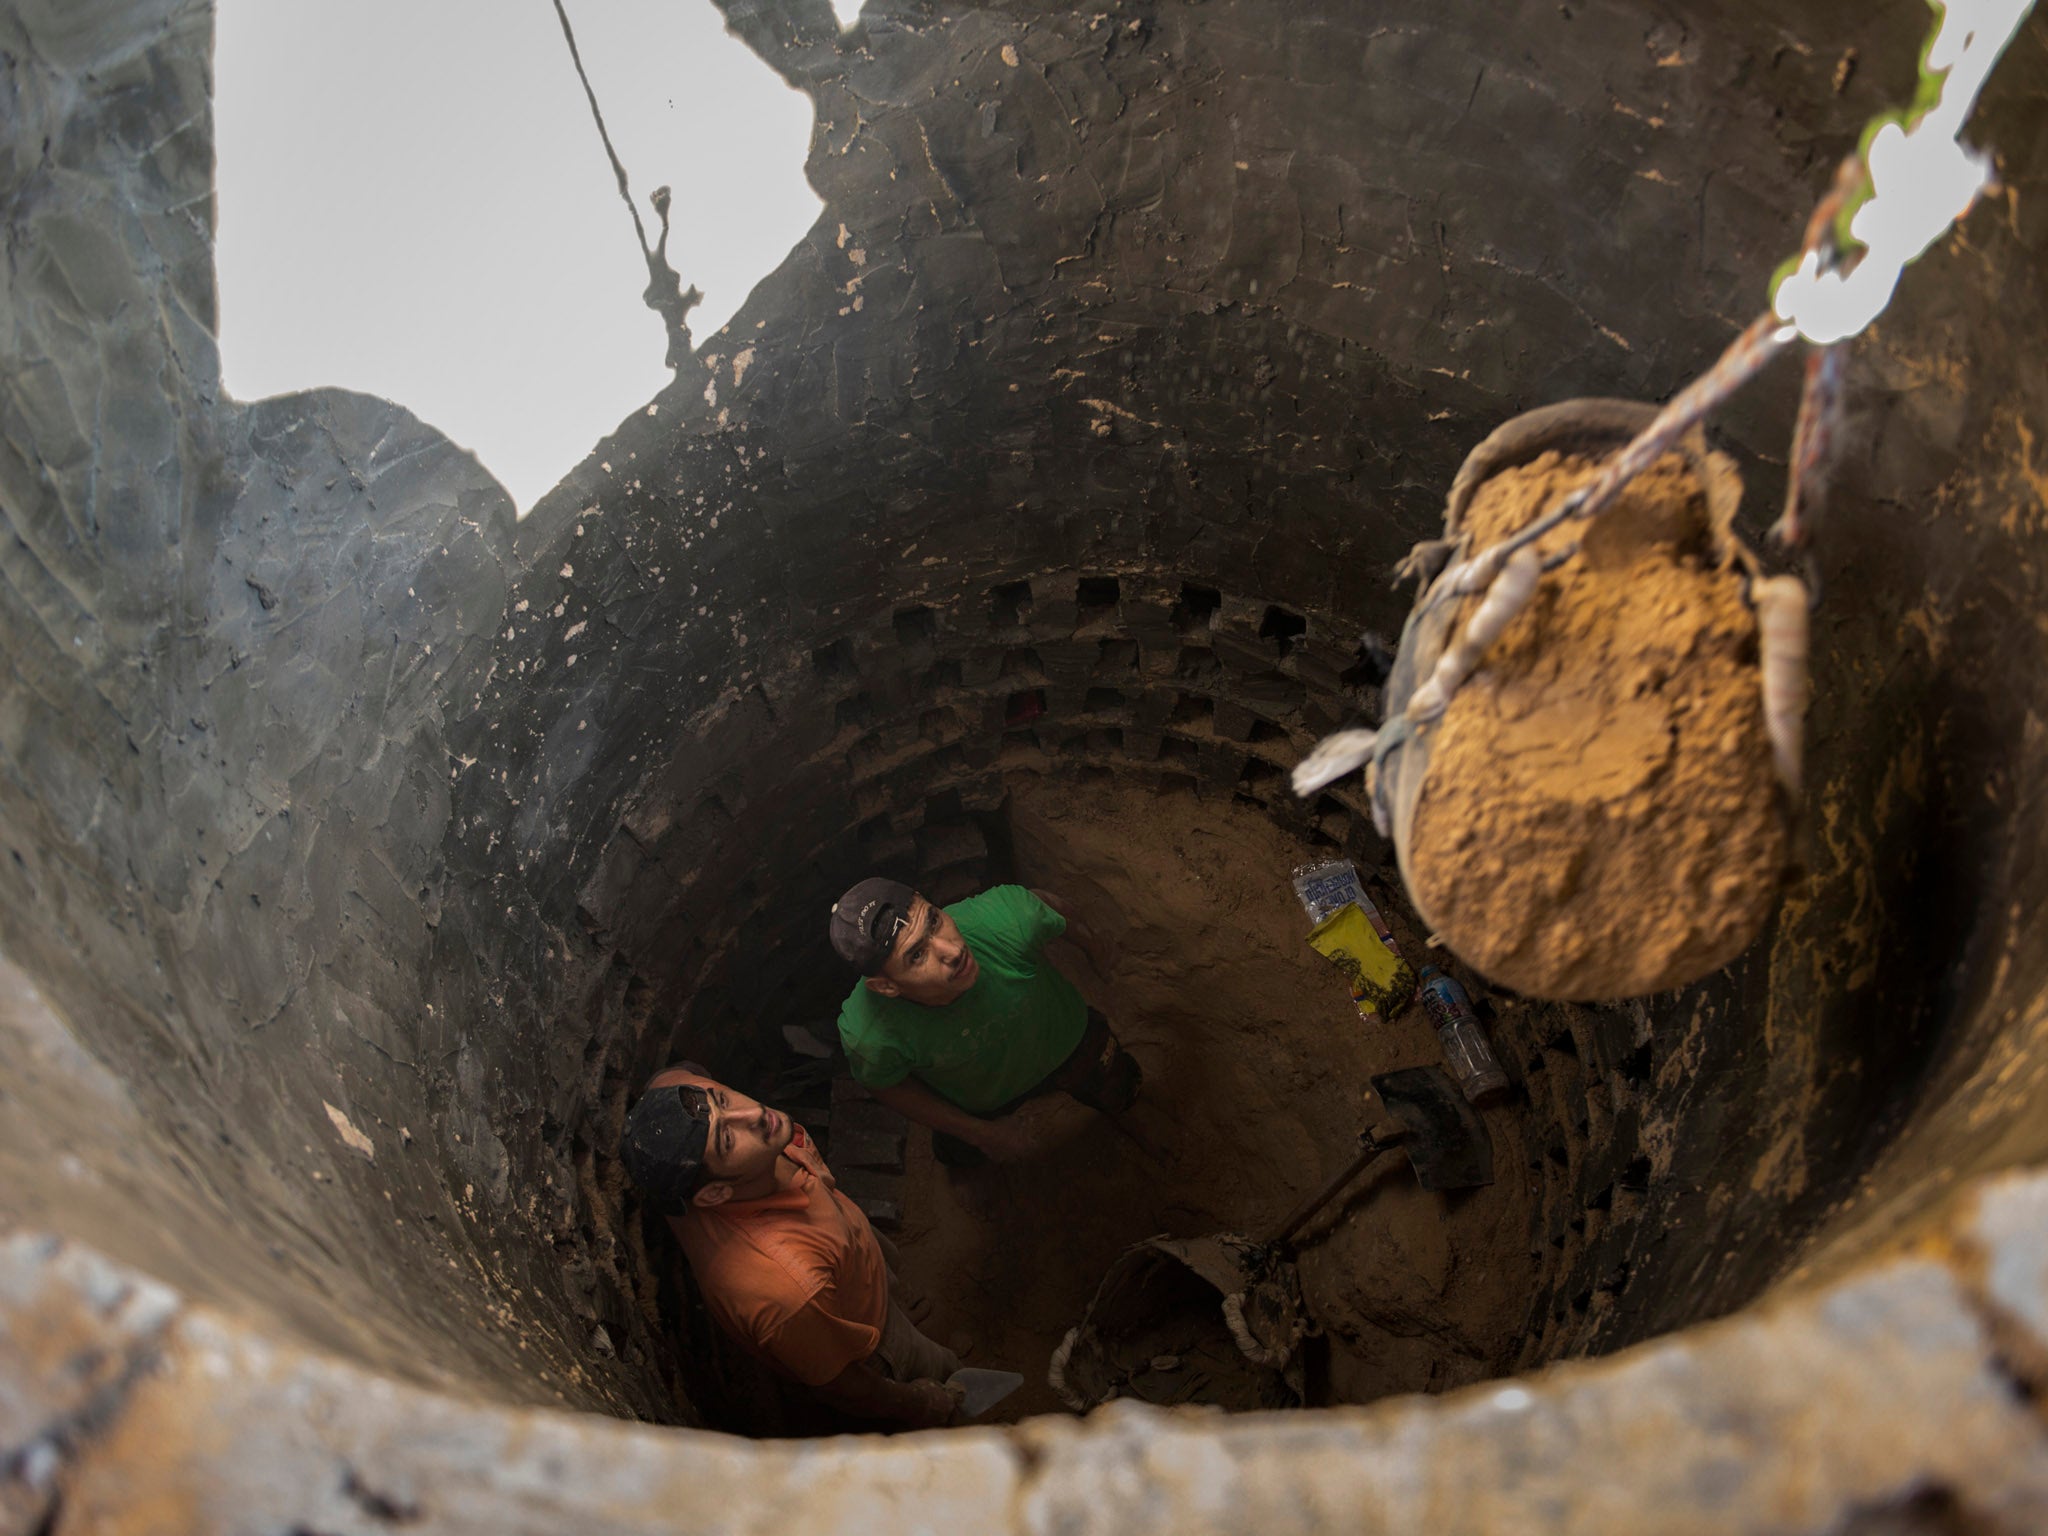 MIDEAST TUNNELS: Ismael al-Arja, 25, and Mahmoud al-Arja, 25, watch as a bucket of soil is hoisted out of the tunnel they are digging along the Egypt-Gaza border.